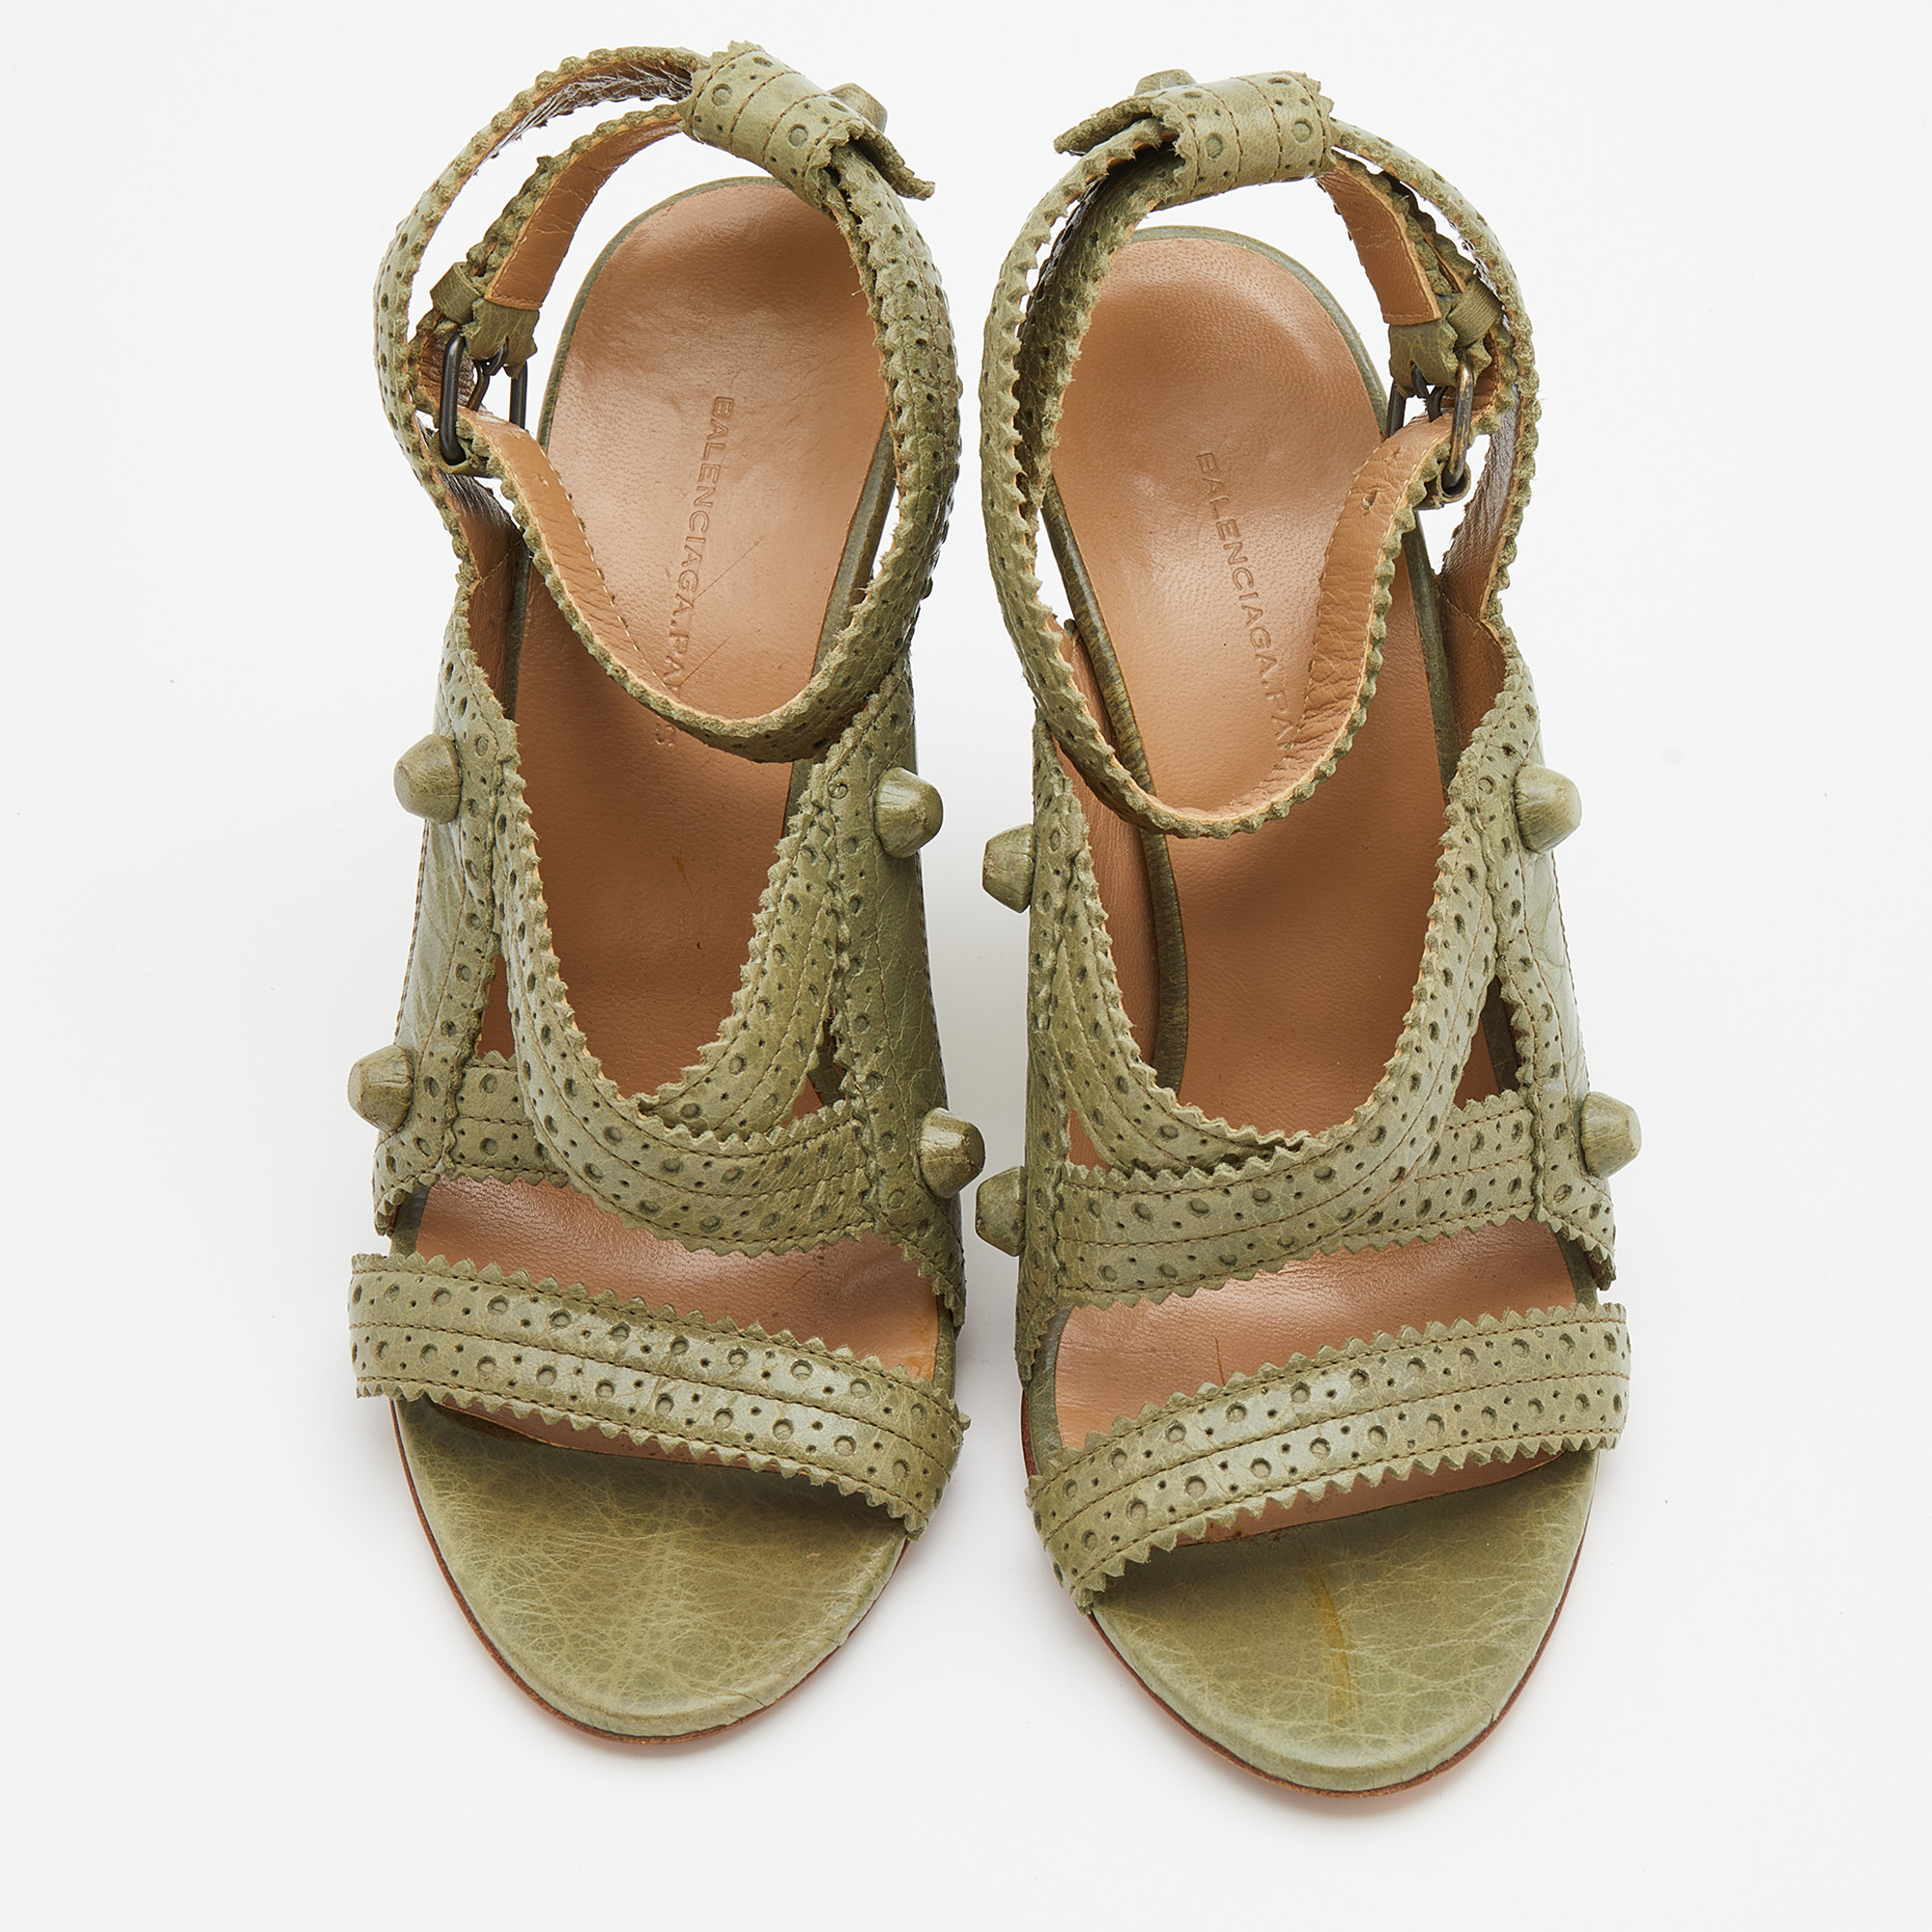 Balenciaga Green Brogue Leather Strappy Wedge Sandals Size 36